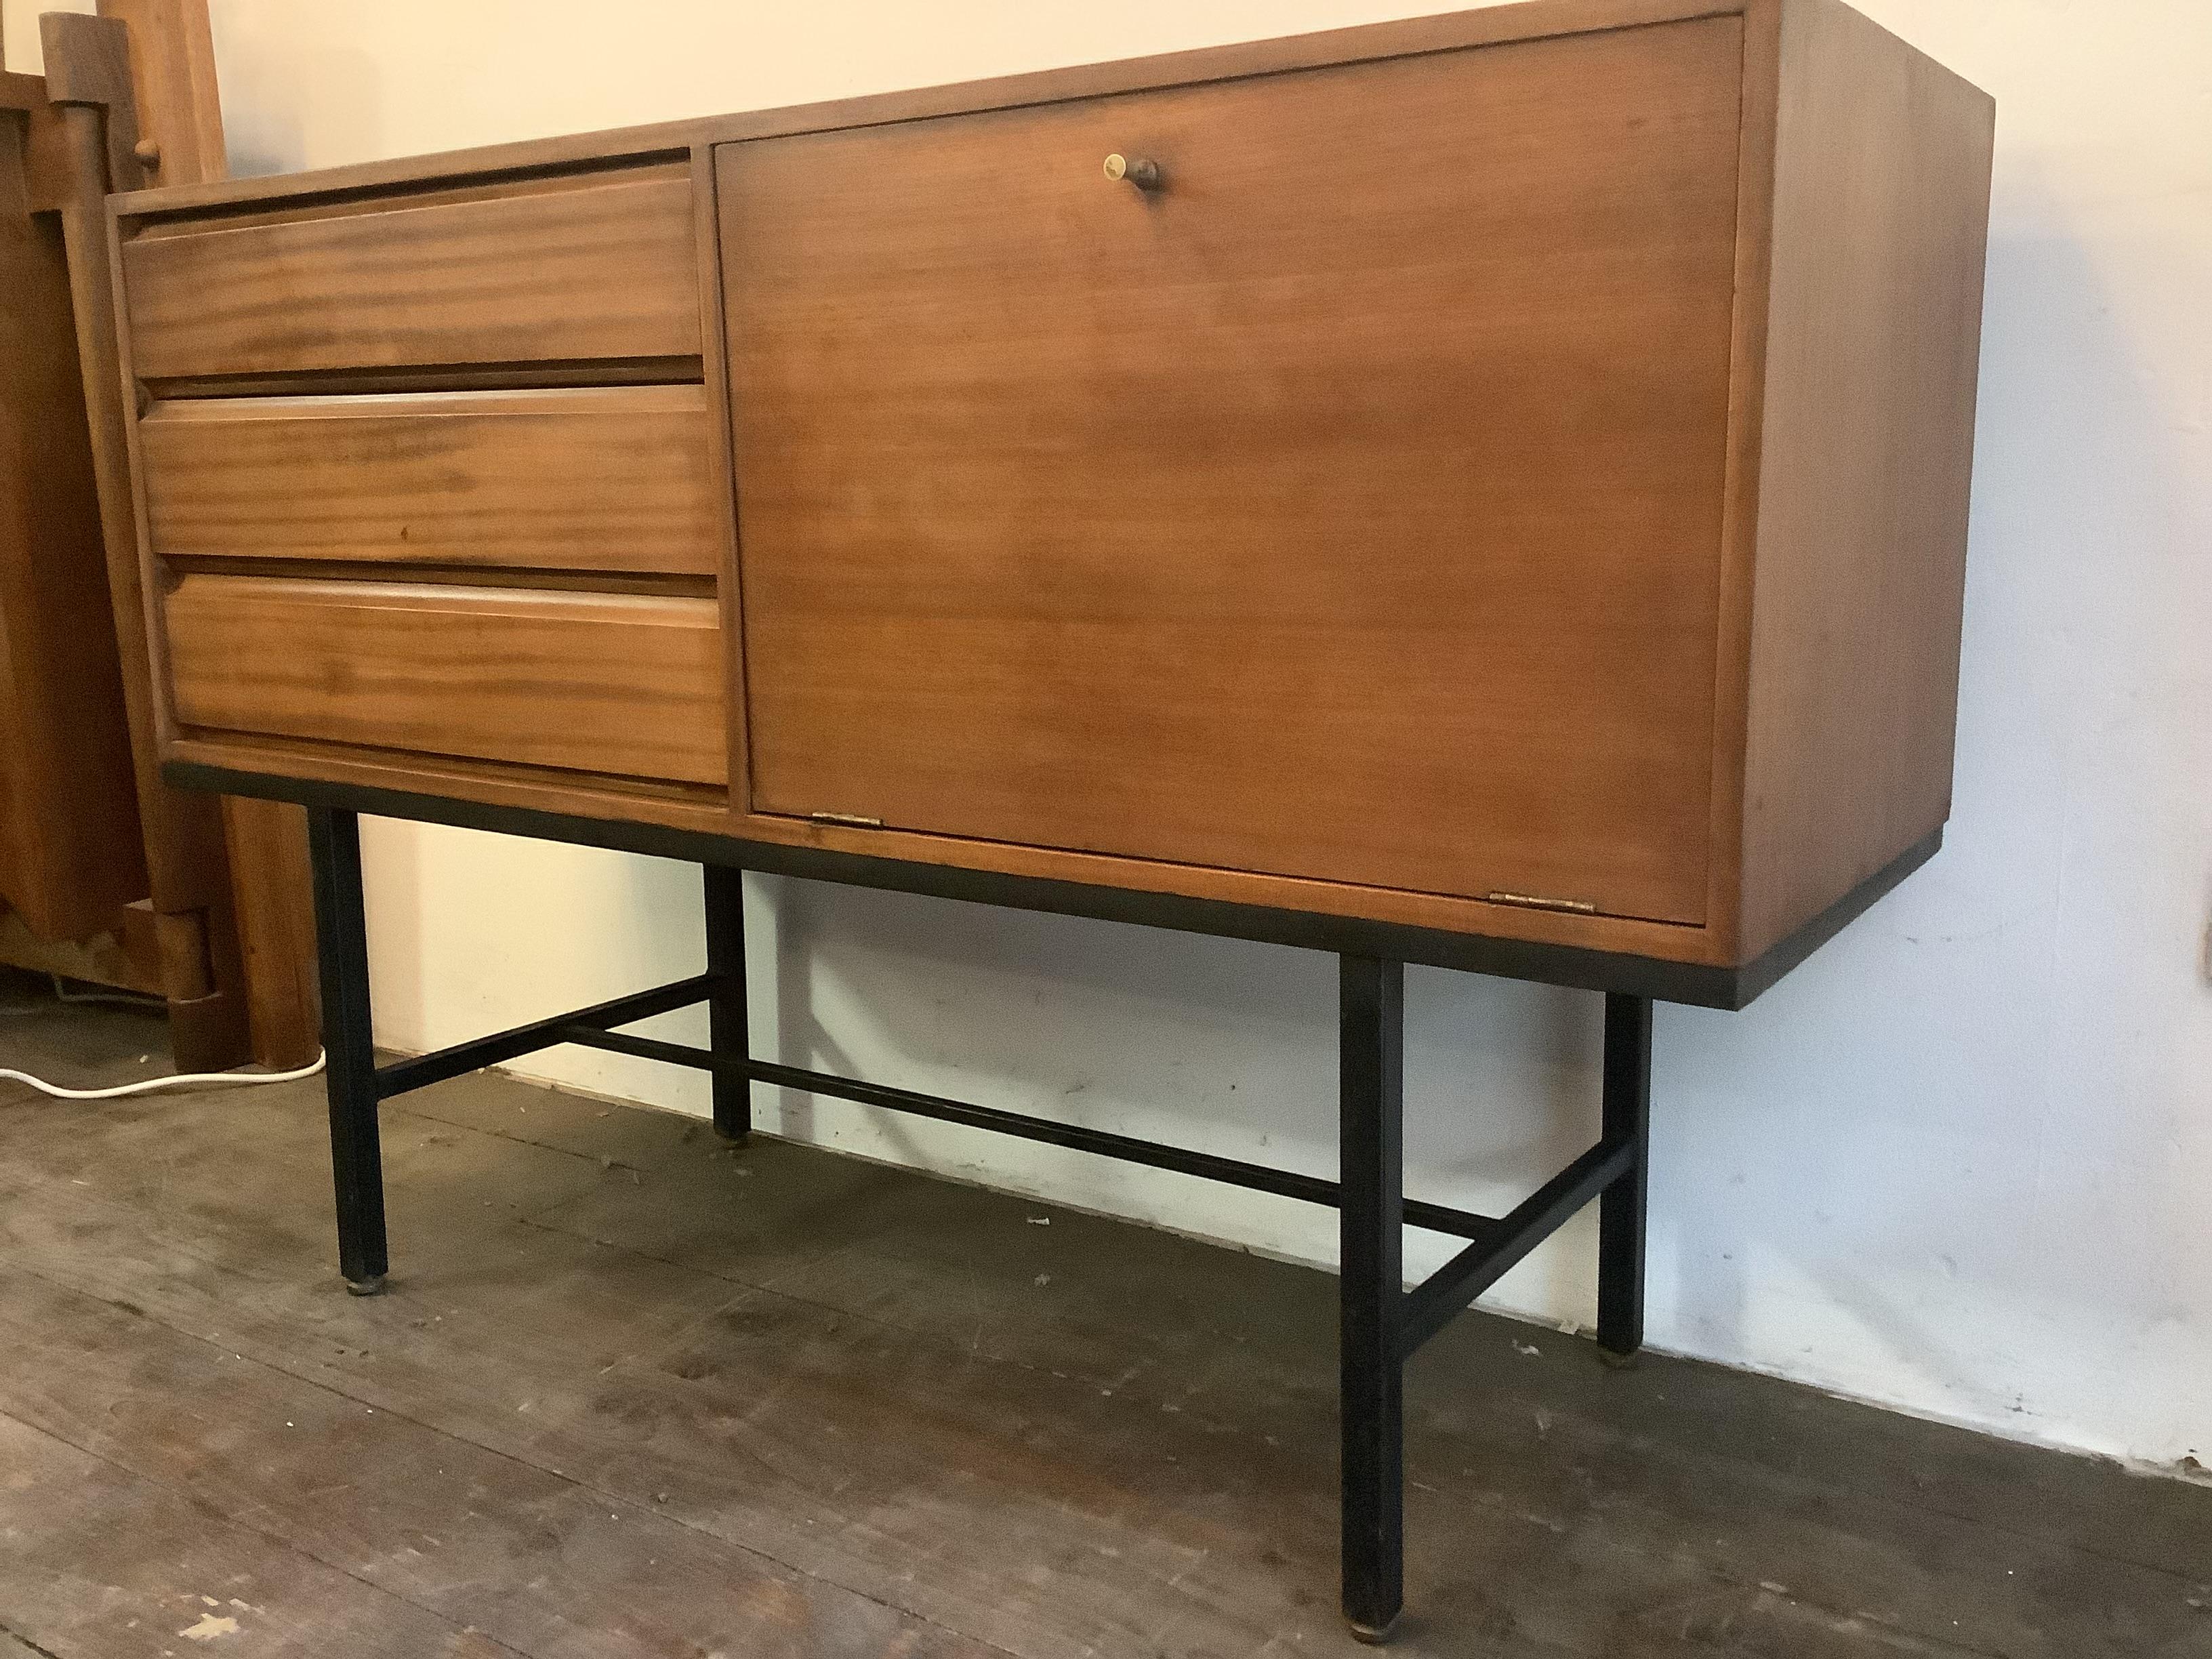 1950s Credenza designed and Manufactured by 
Bowman Brothers of Camden Town founded by Thomas Bowman in 1871

Modernists design with pull down door and three storage 
Draws.